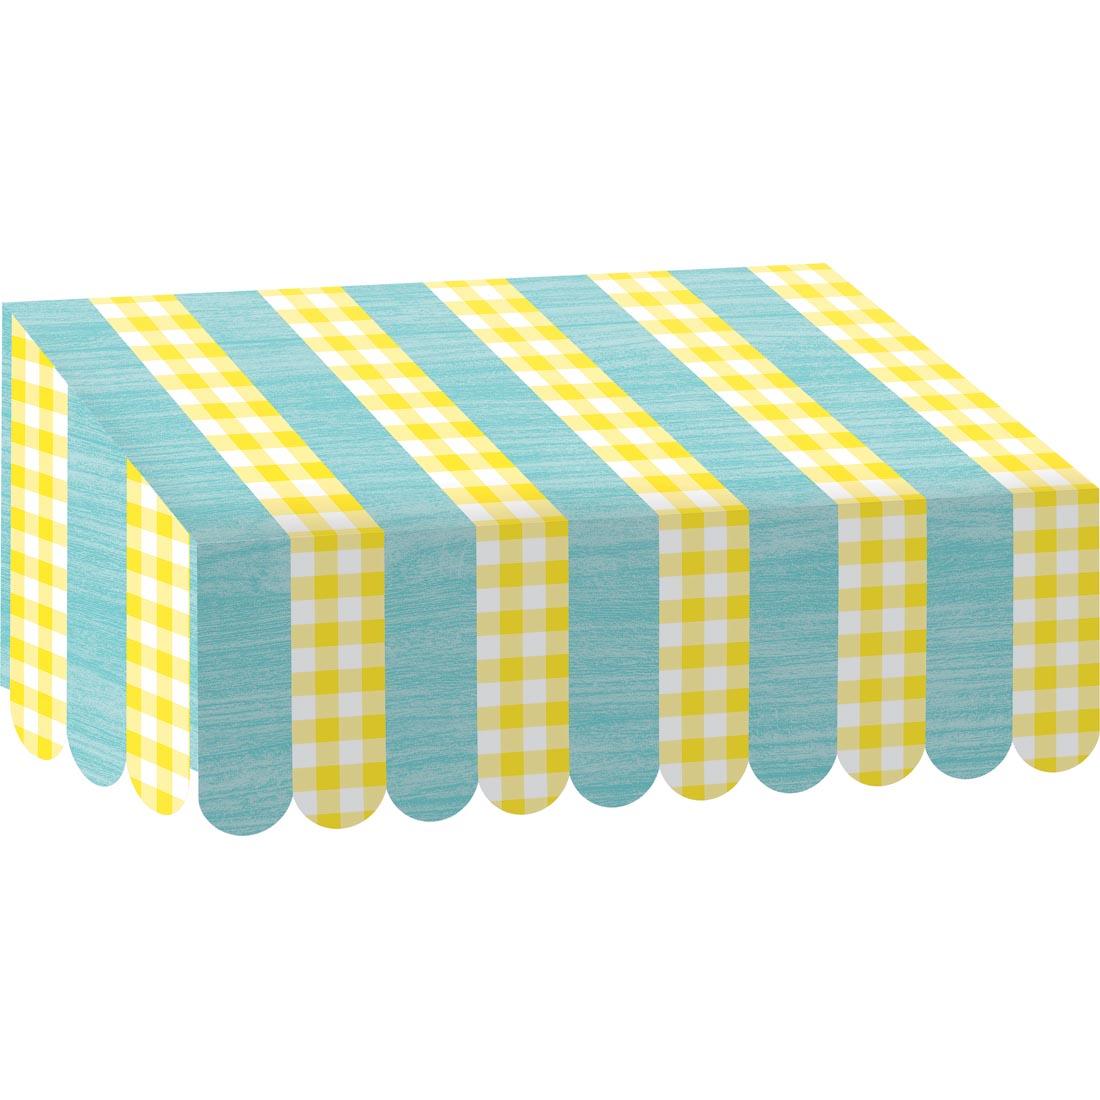 Awning from the Lemon Zest collection by Teacher Created Resources